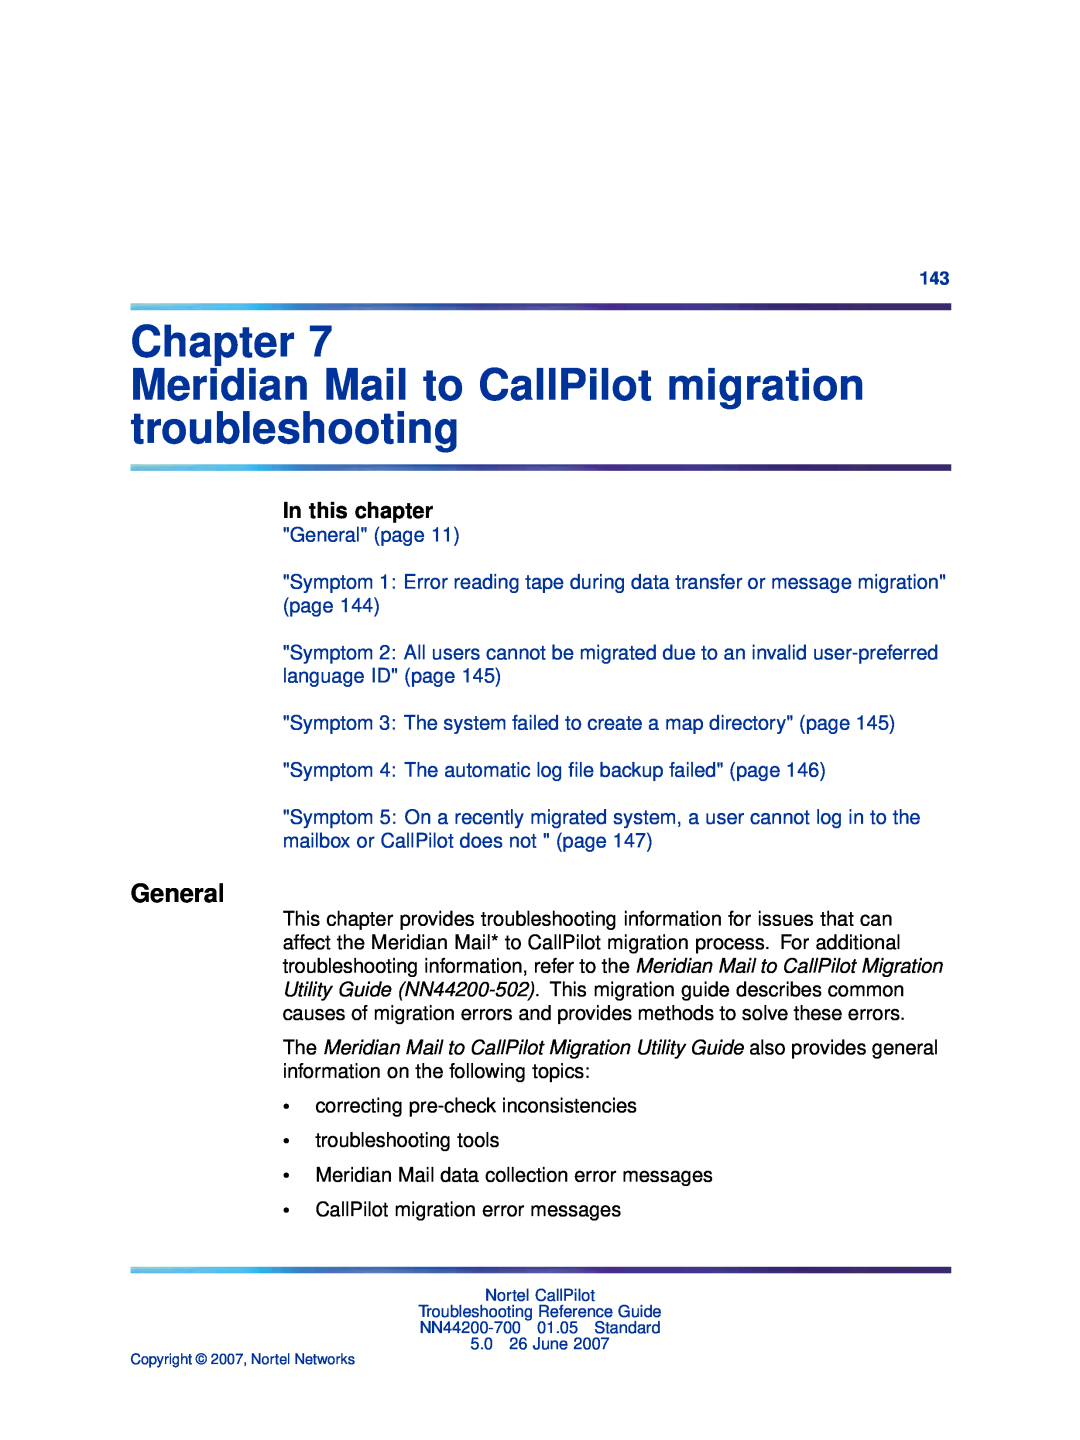 Nortel Networks NN44200-700 manual Chapter Meridian Mail to CallPilot migration troubleshooting, General, In this chapter 